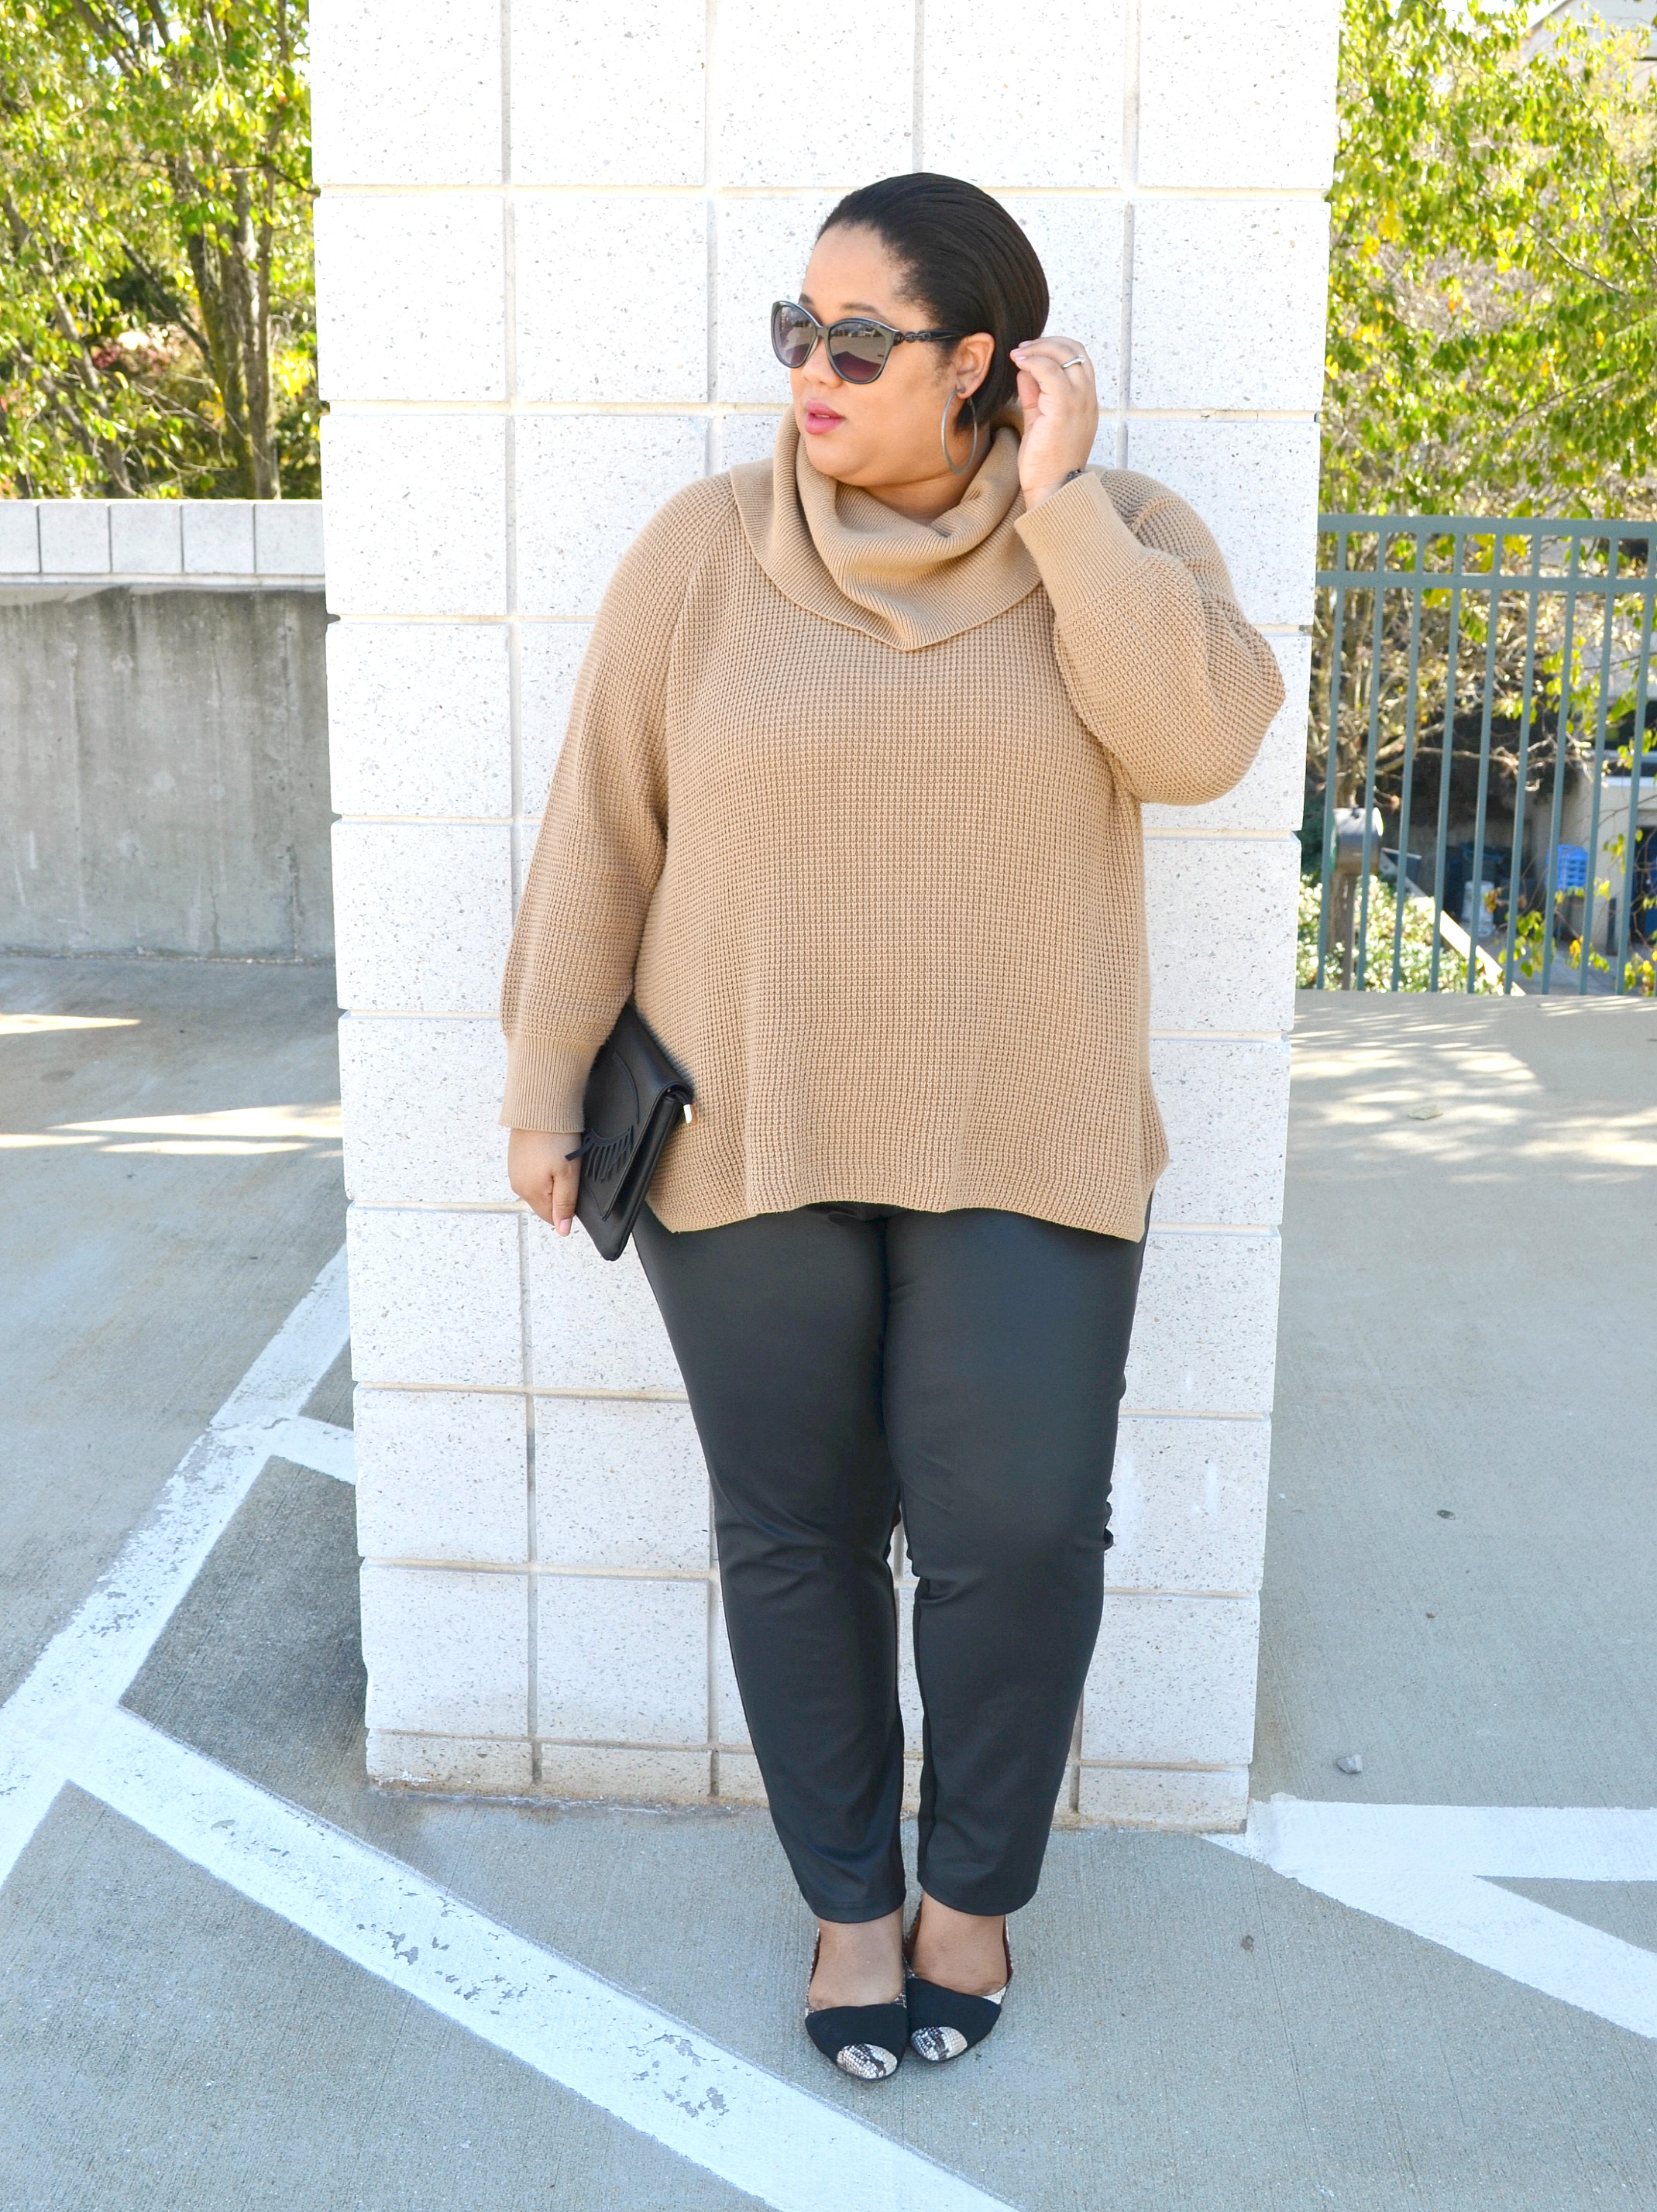 Chunky Sweaters and Leggings OOTD